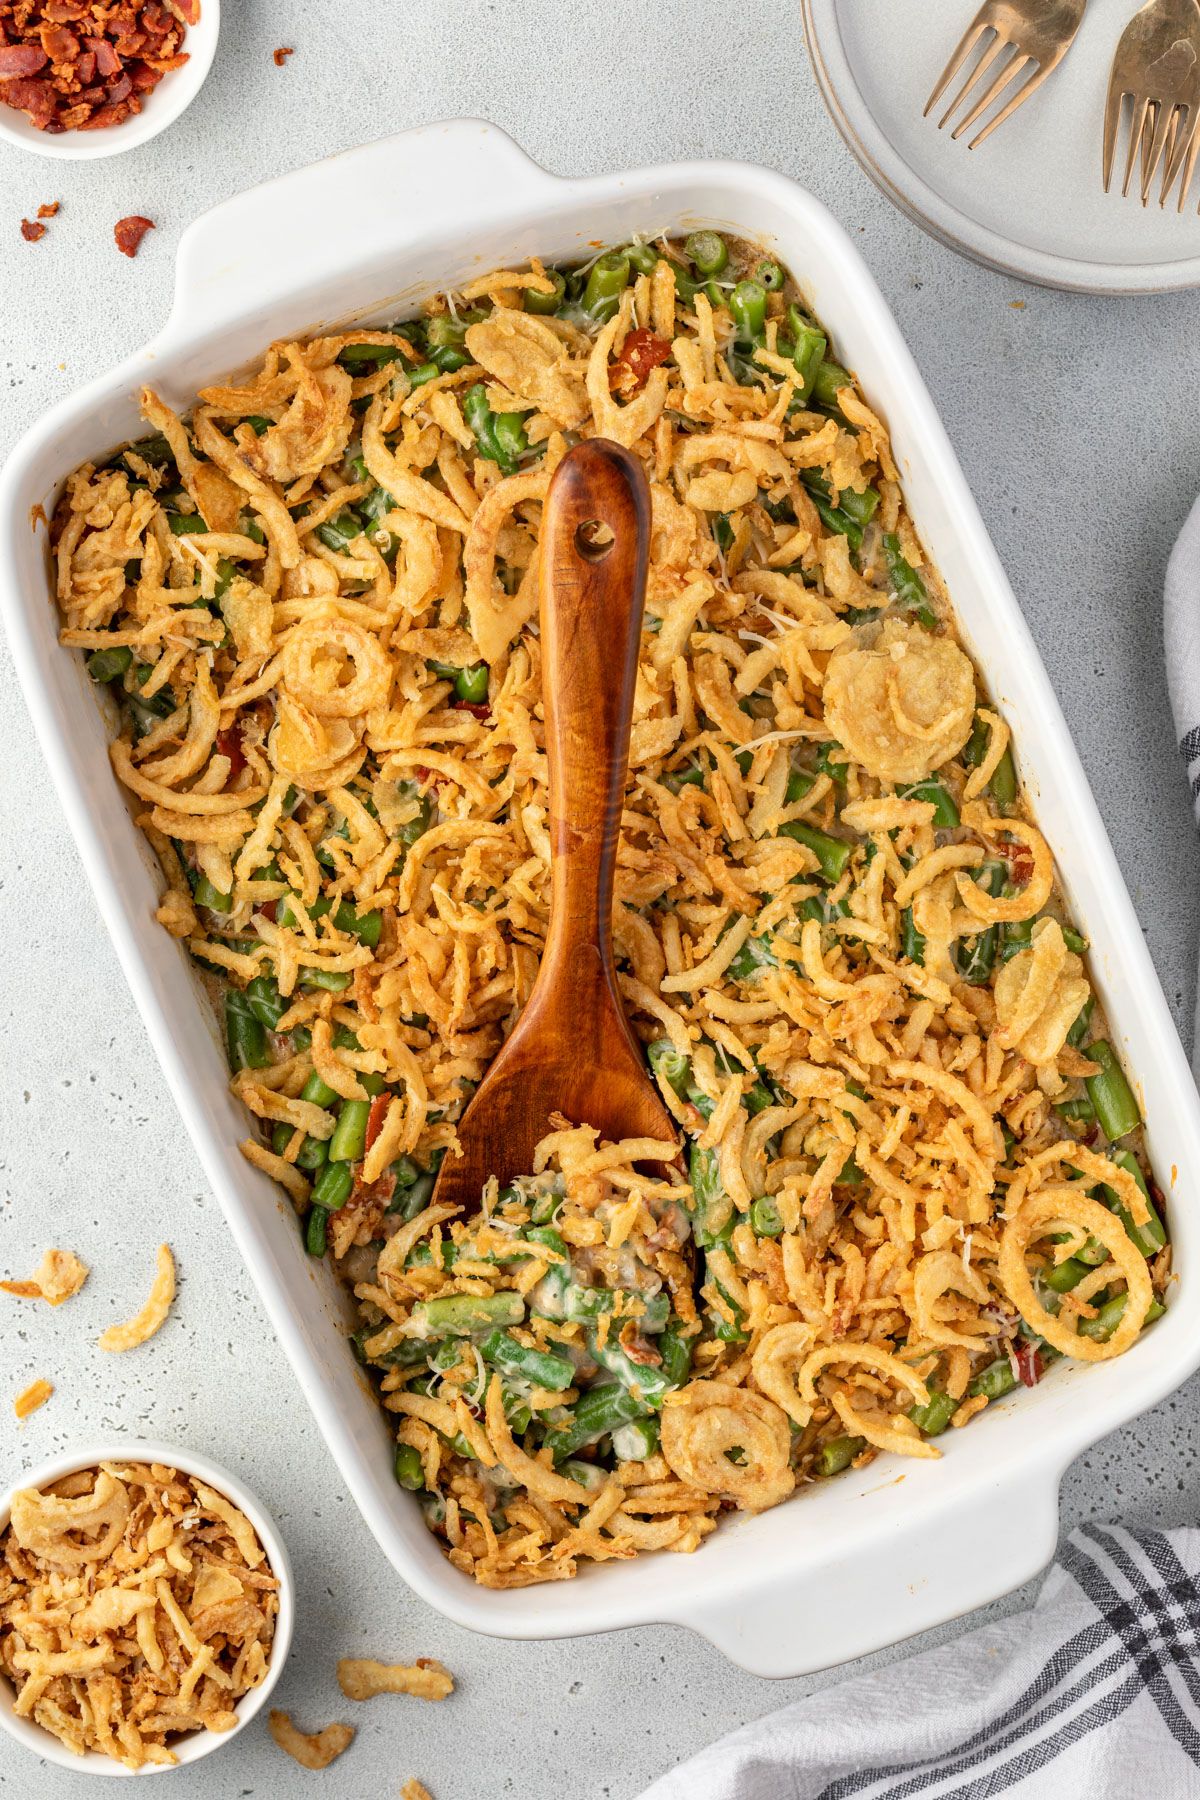 A 9x13 pan of green bean casserole with a wooden spoon scooping out a portion.